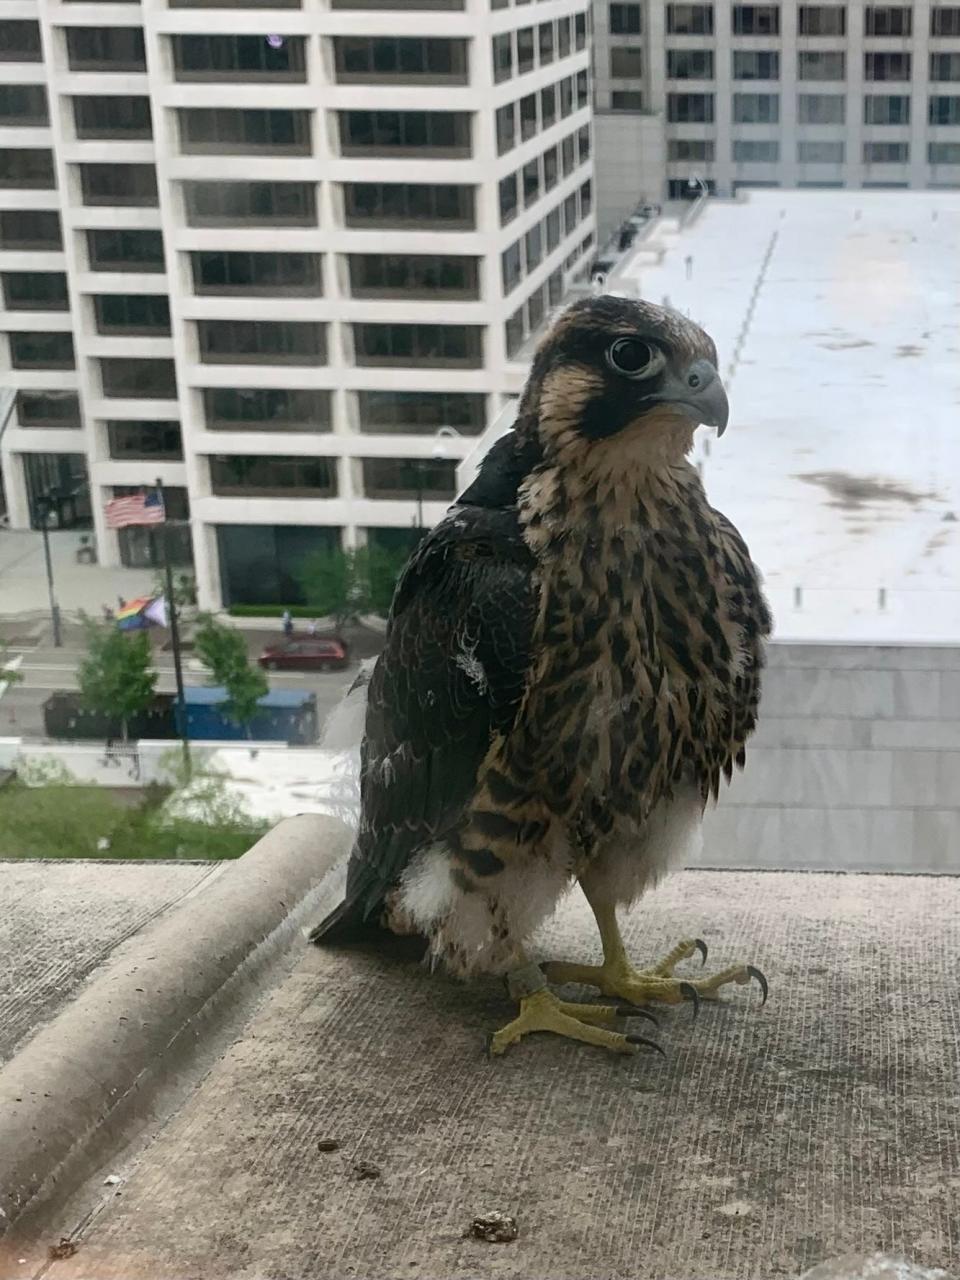 One of the peregrine falcon eyases ventured out of the nest to pay a visit to Mercantile Library Executive Director John Faherty's window.